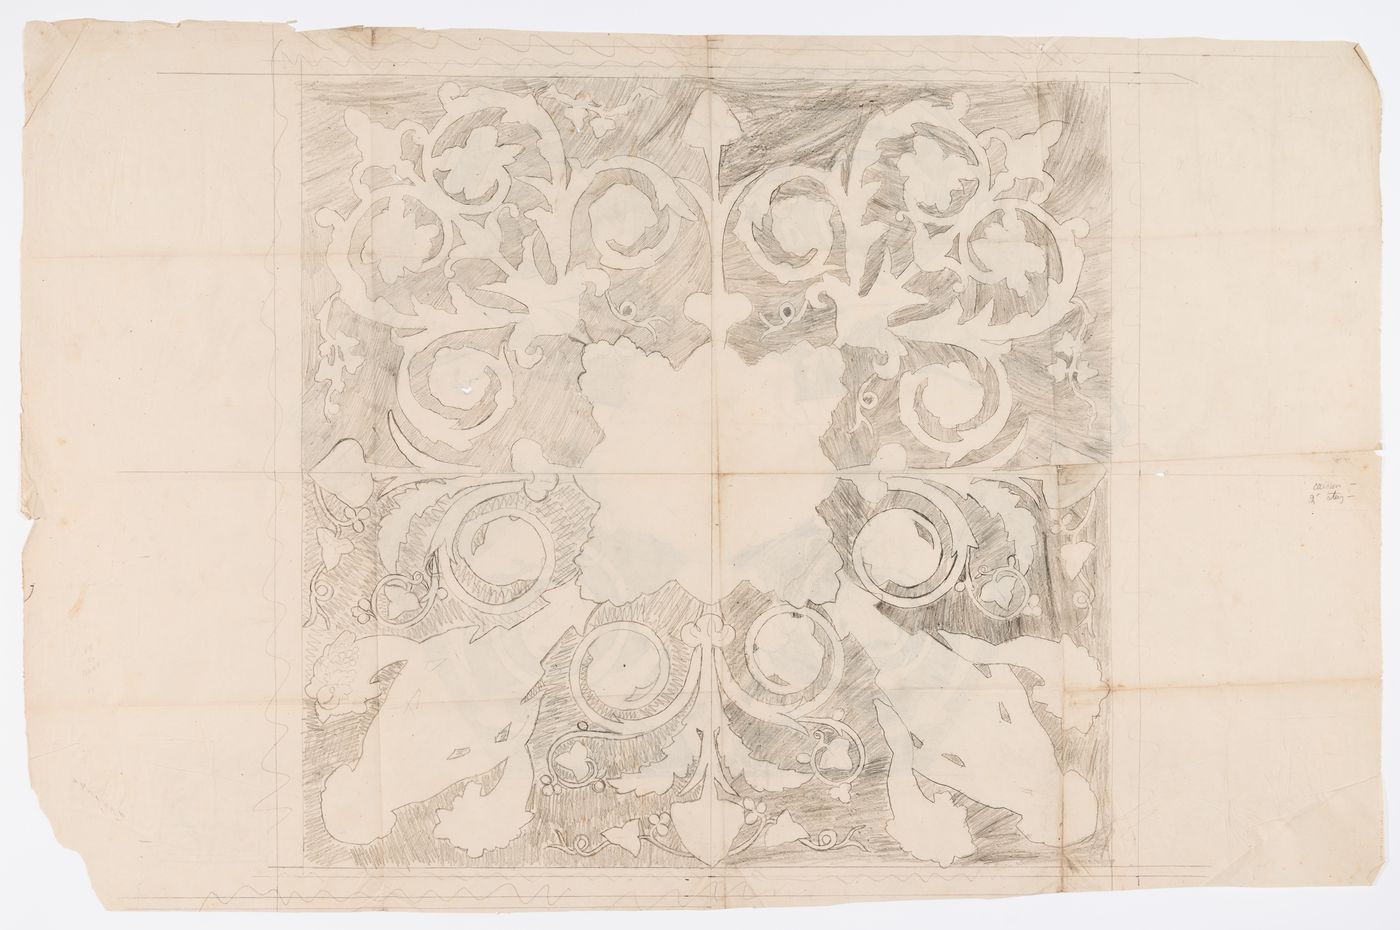 Full-scale drawing for a hexagonal ornamental panel with two variant foliate patterns, possibly for Hôtel Soltkoff; verso: Full-scale drawing for a square ornamental panel with two variant foliate patterns, possibly for Hôtel Soltykoff